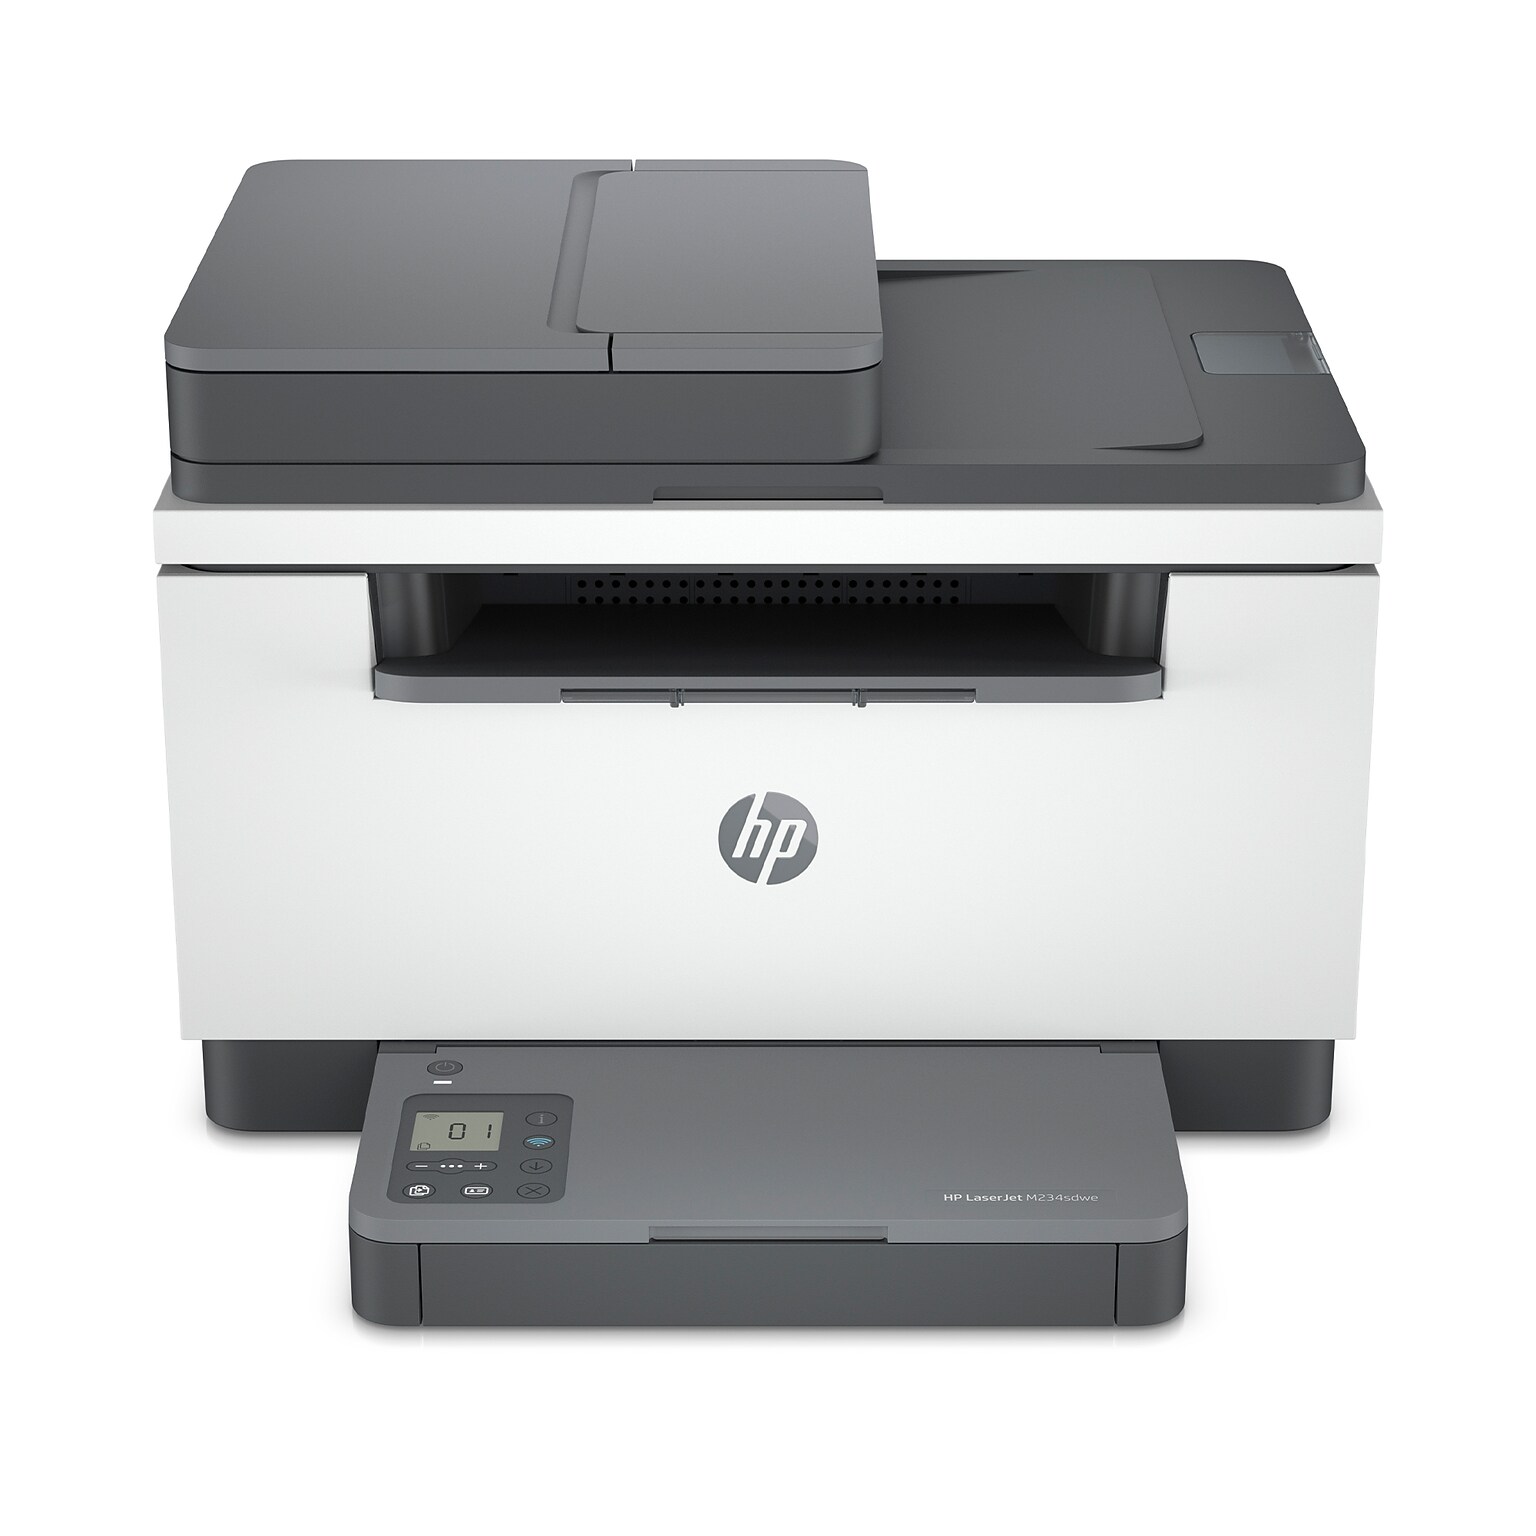 HP LaserJet MFP M234sdwe Wireless Black & White Printer Includes 6 Months of FREE Toner with HP+ (6GX01E)